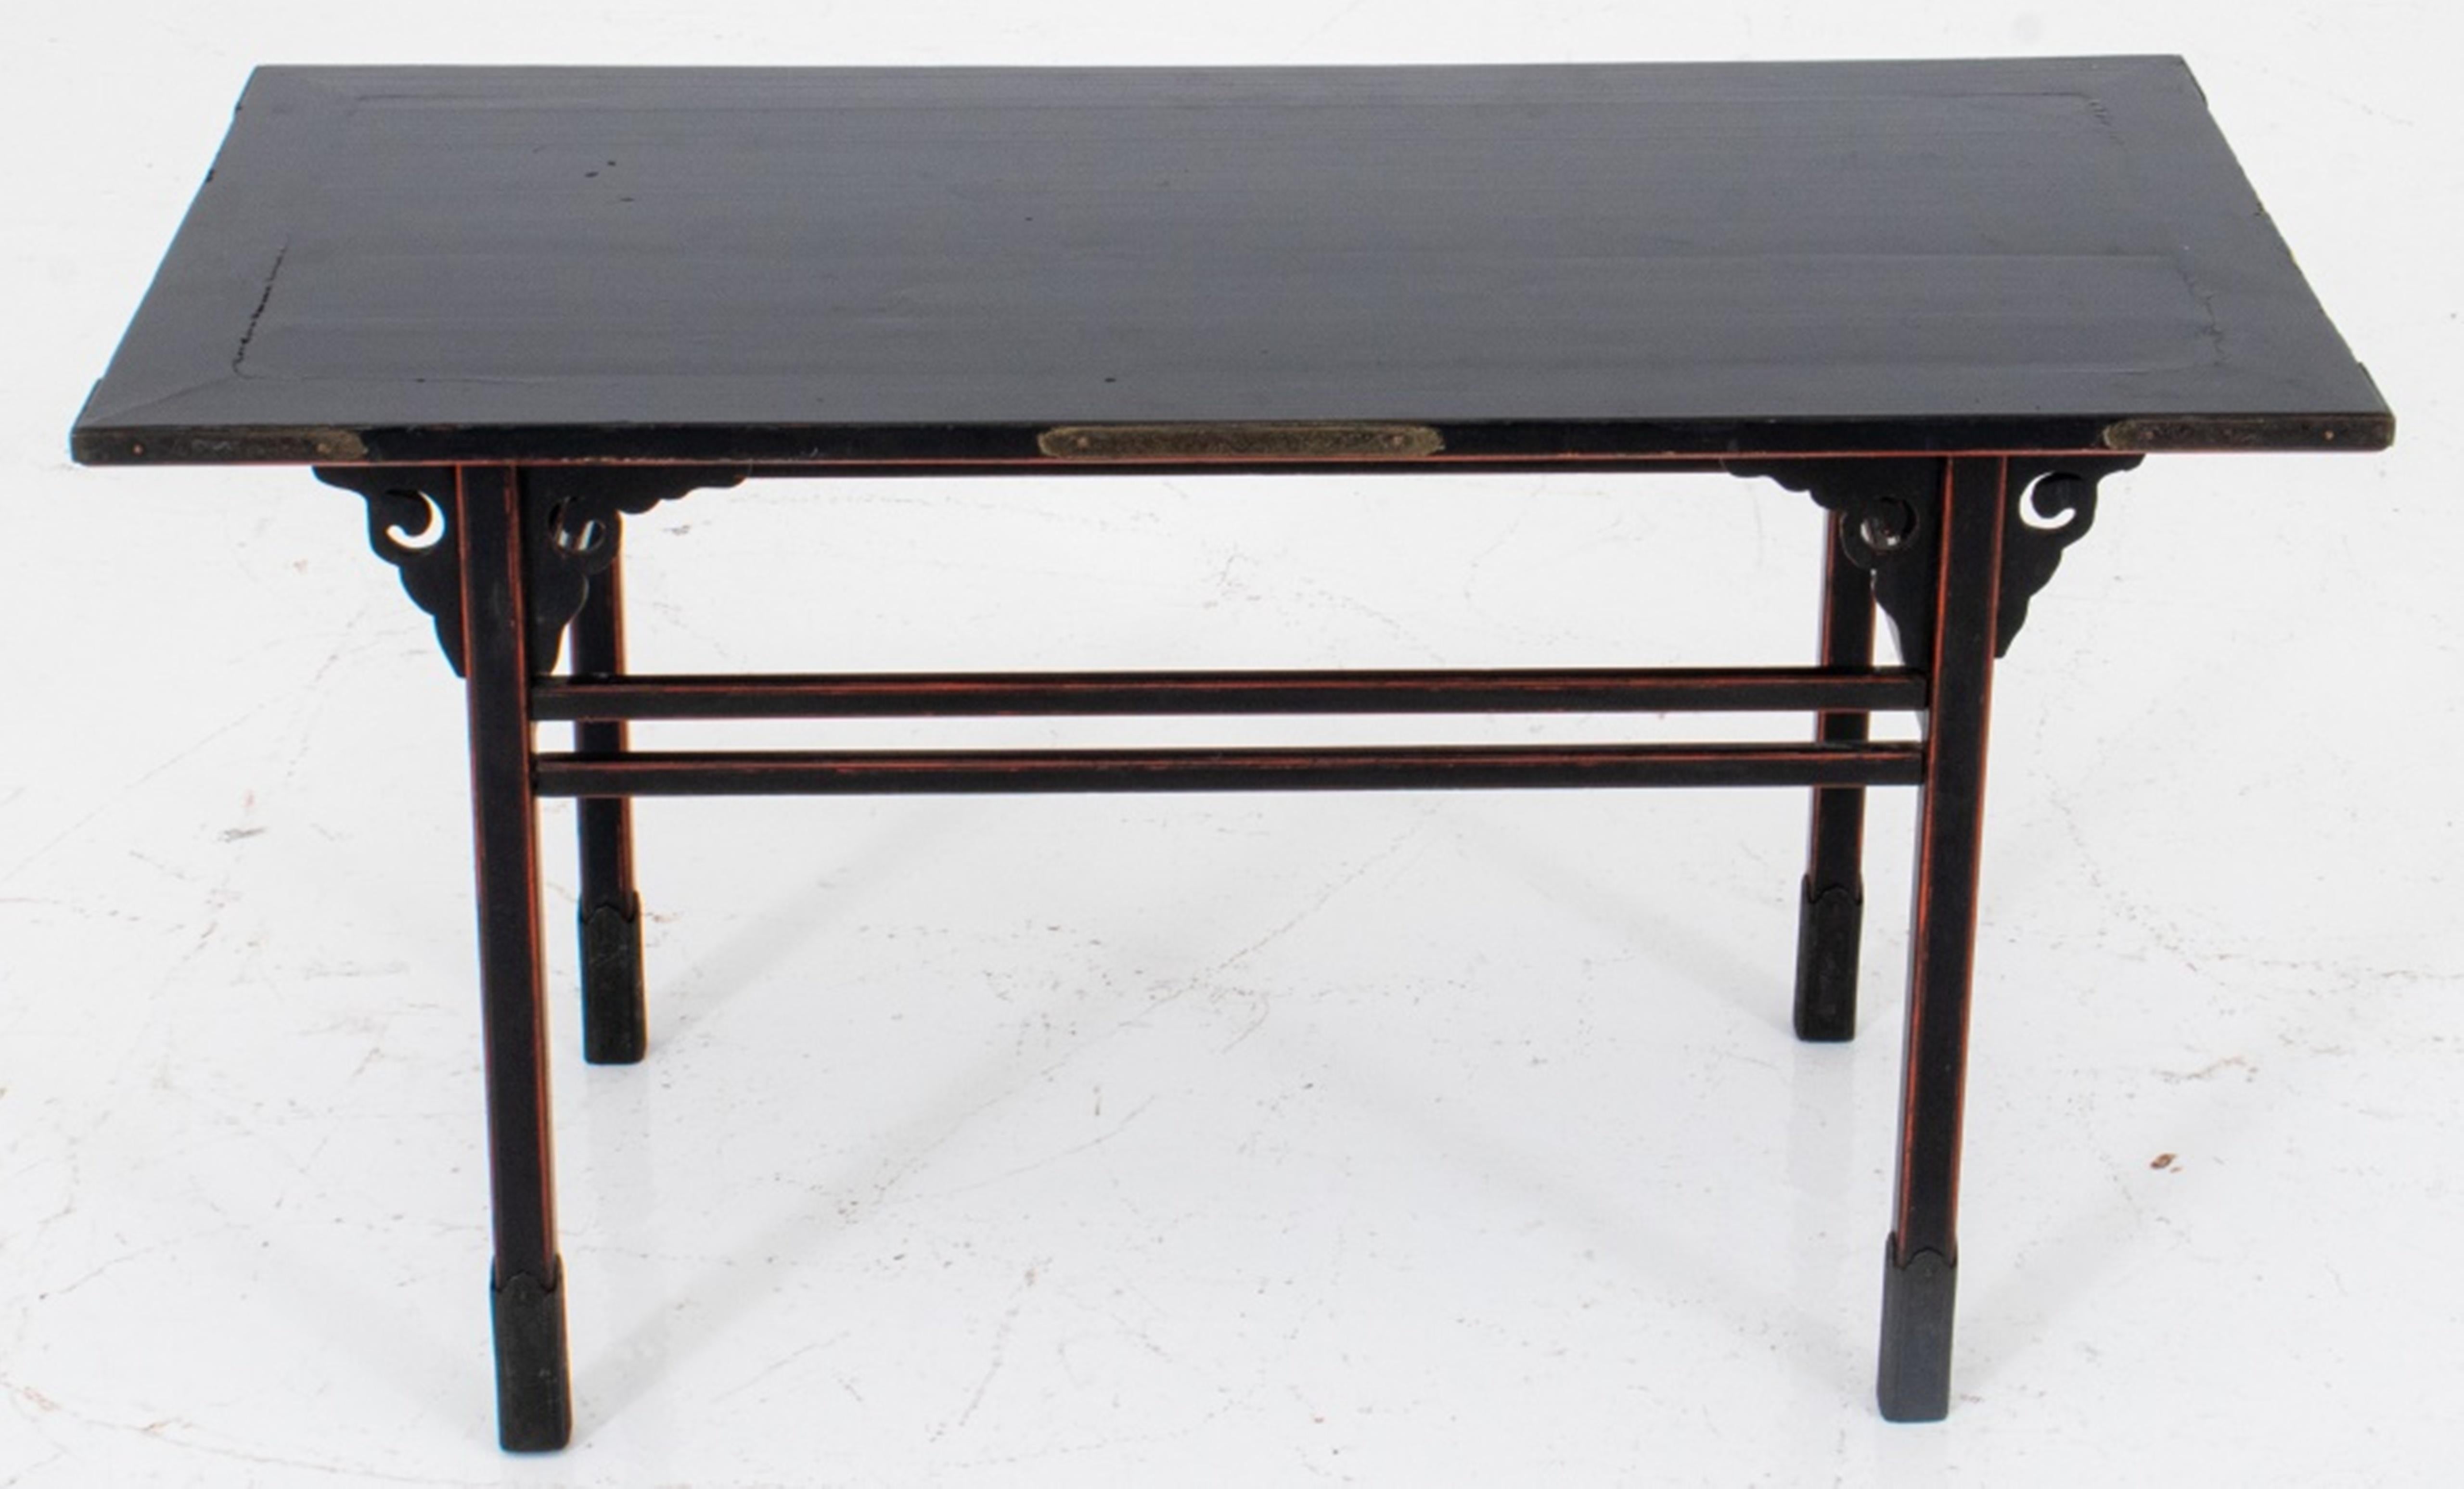 Japanese black lacquer alter table with cloud-form joints, red painted borders,
and incised patinated metal decoration, nineteenth century. 13.5